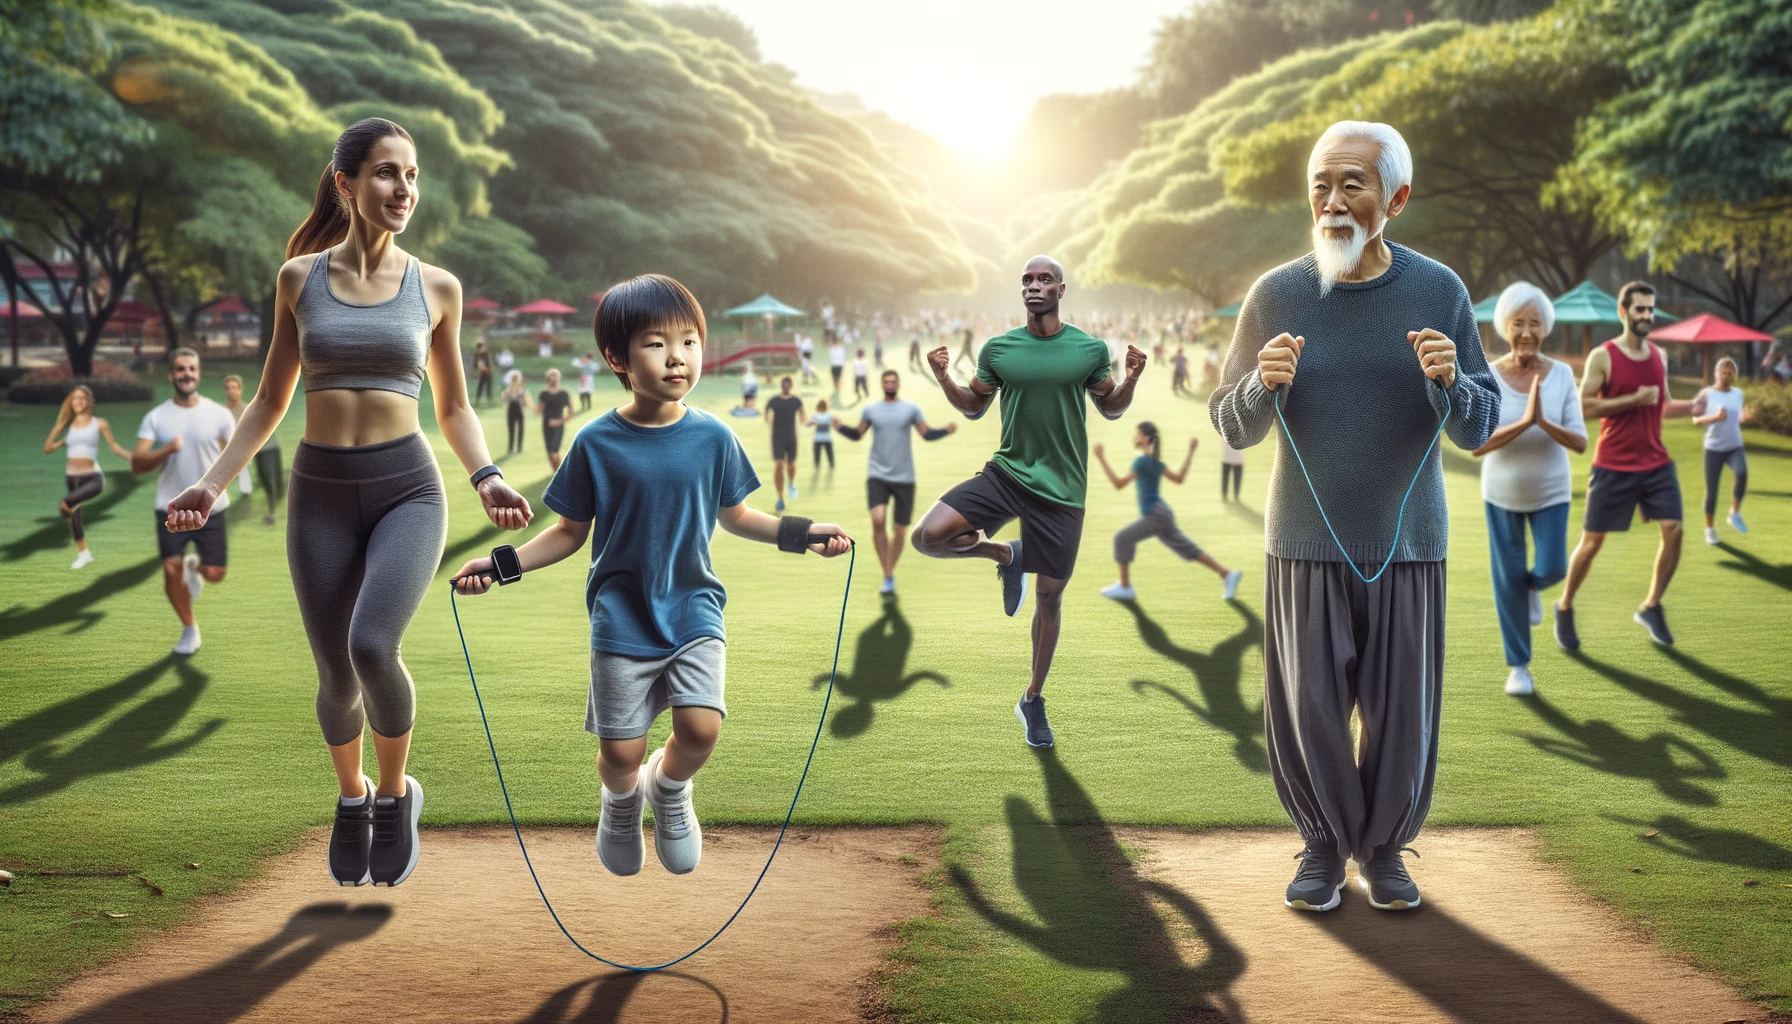 A diverse group of individuals engaging in physical activity in a park setting, with a child of Asian descent jumping rope, a young adult Caucasian woman jogging, and an older adult Black man practicing Tai Chi.